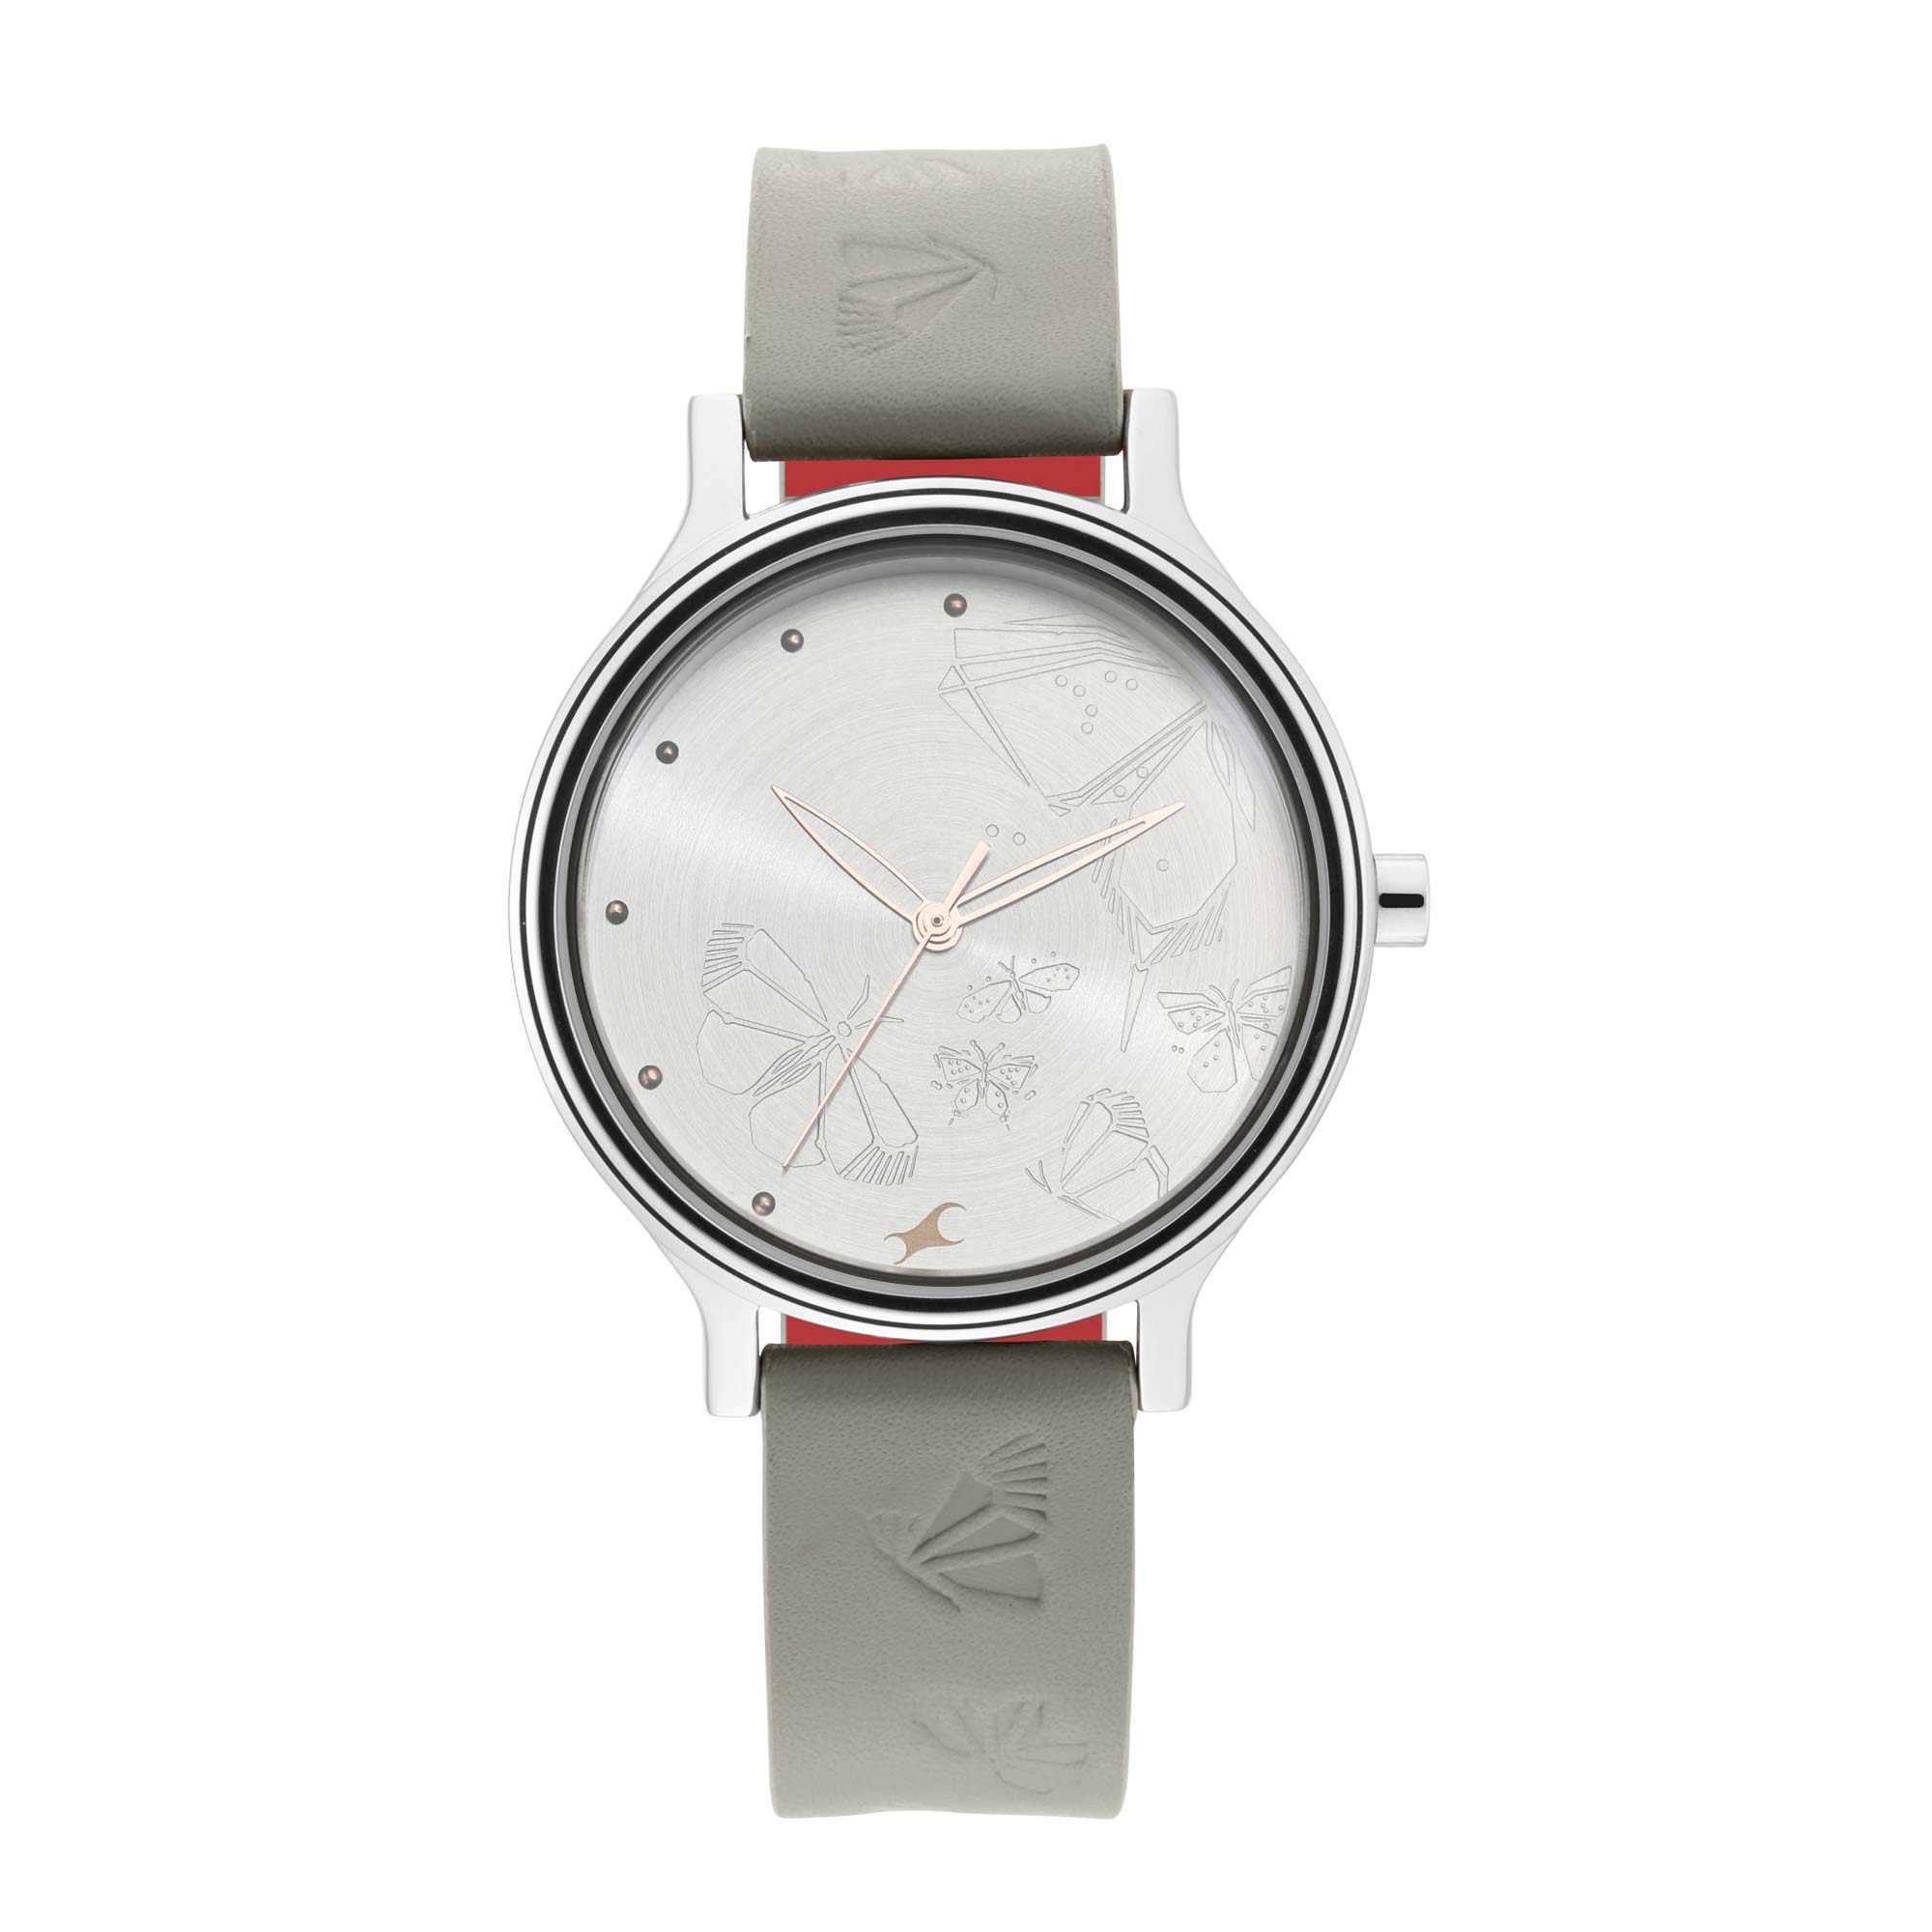 Fastrack I Love Me Quartz Analog Silver Dial Leather Strap Watch for Girls